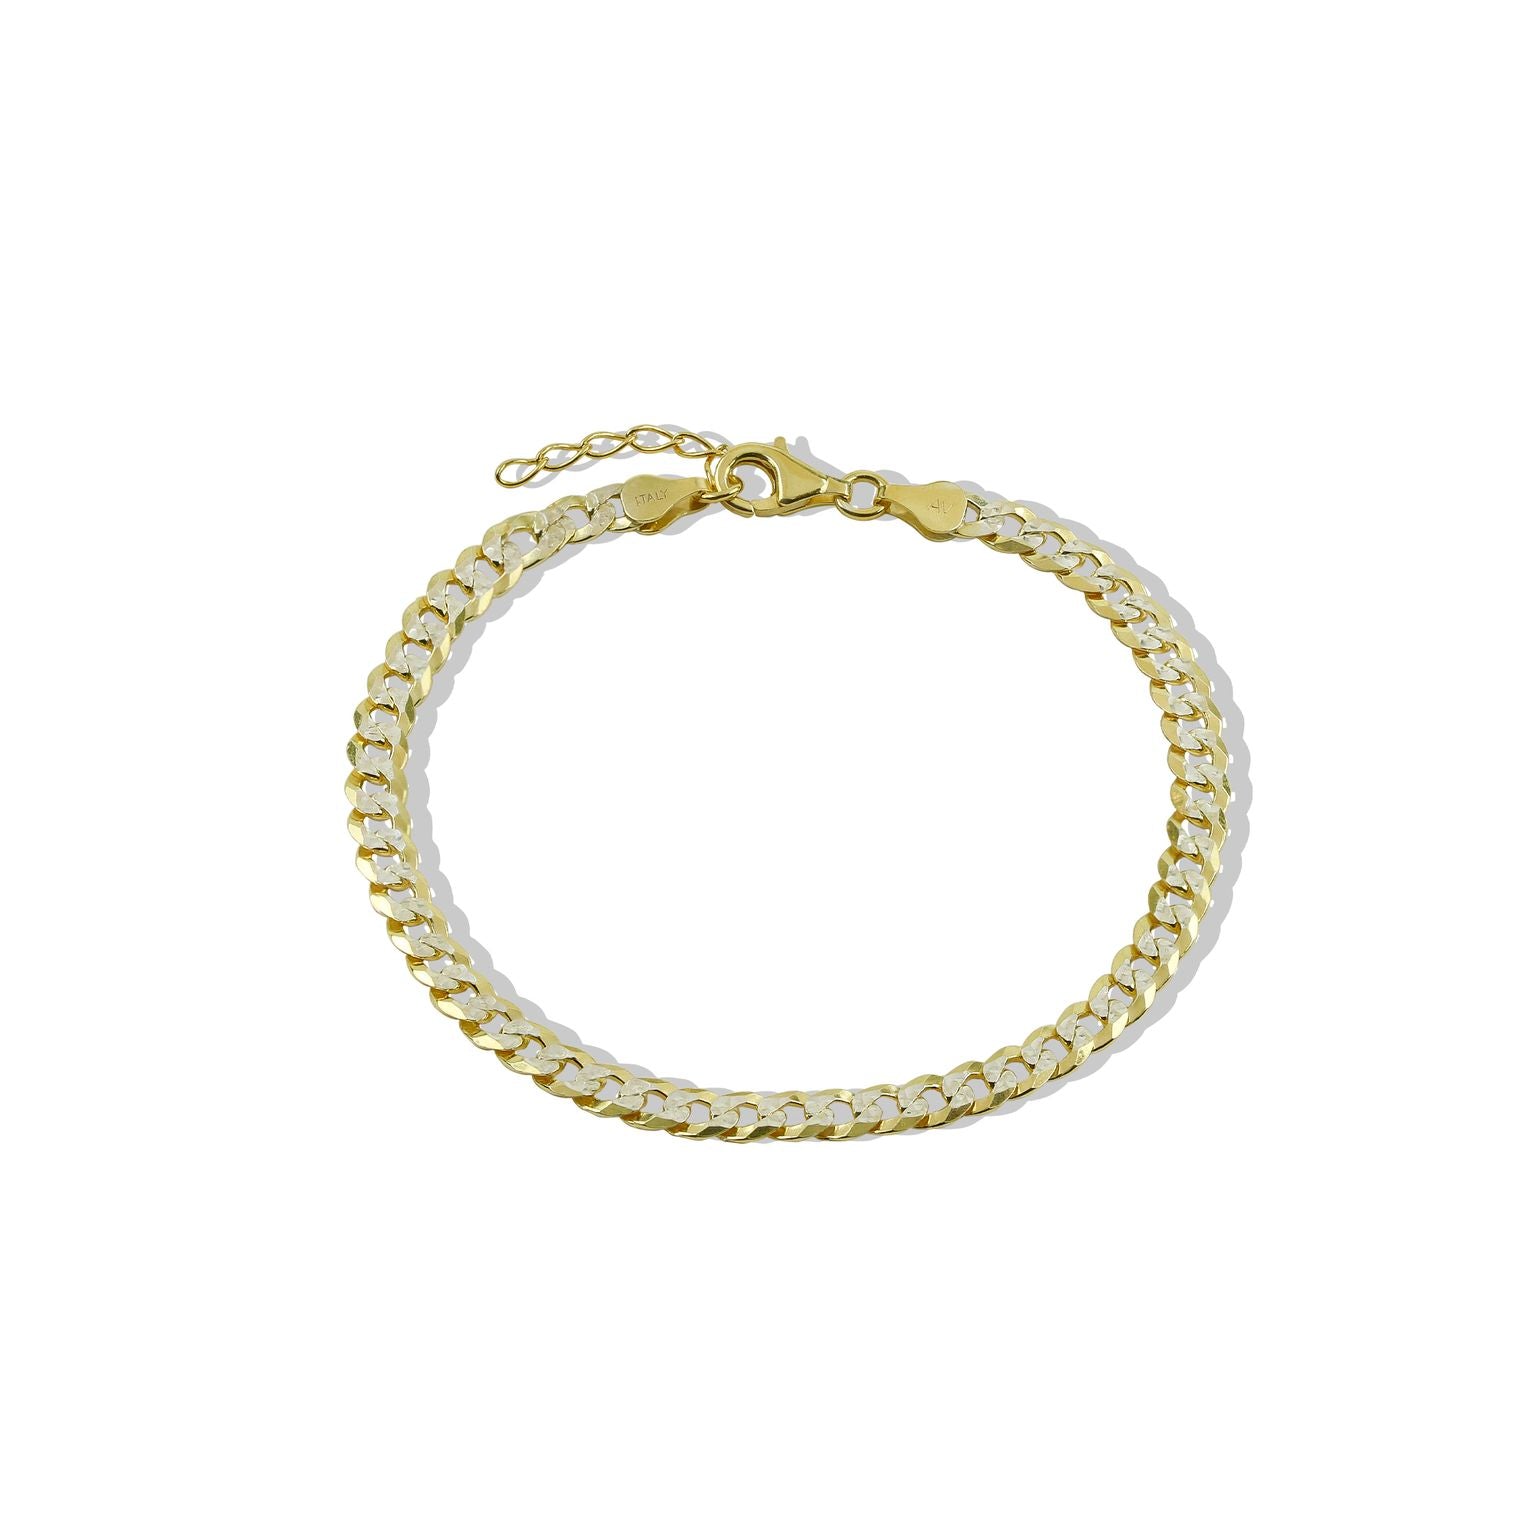 THE ESSENTIAL TWO TONE CURB ANKLET